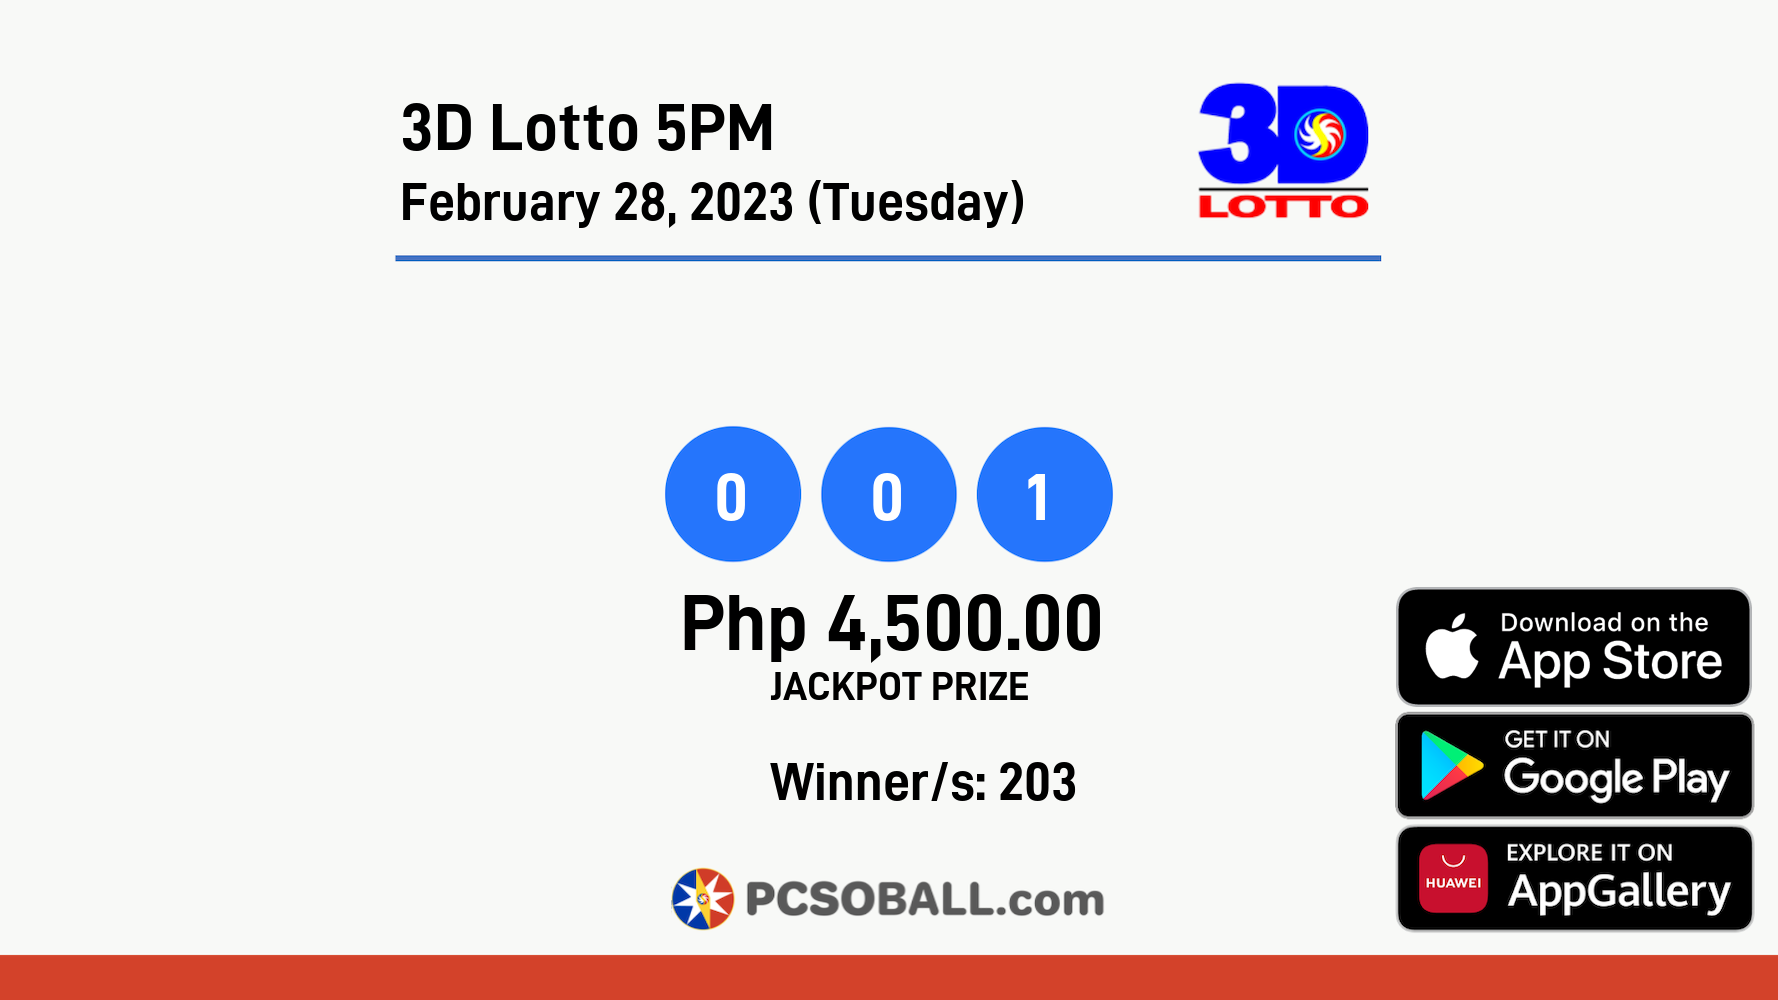 3D Lotto 5PM February 28, 2023 (Tuesday) Result